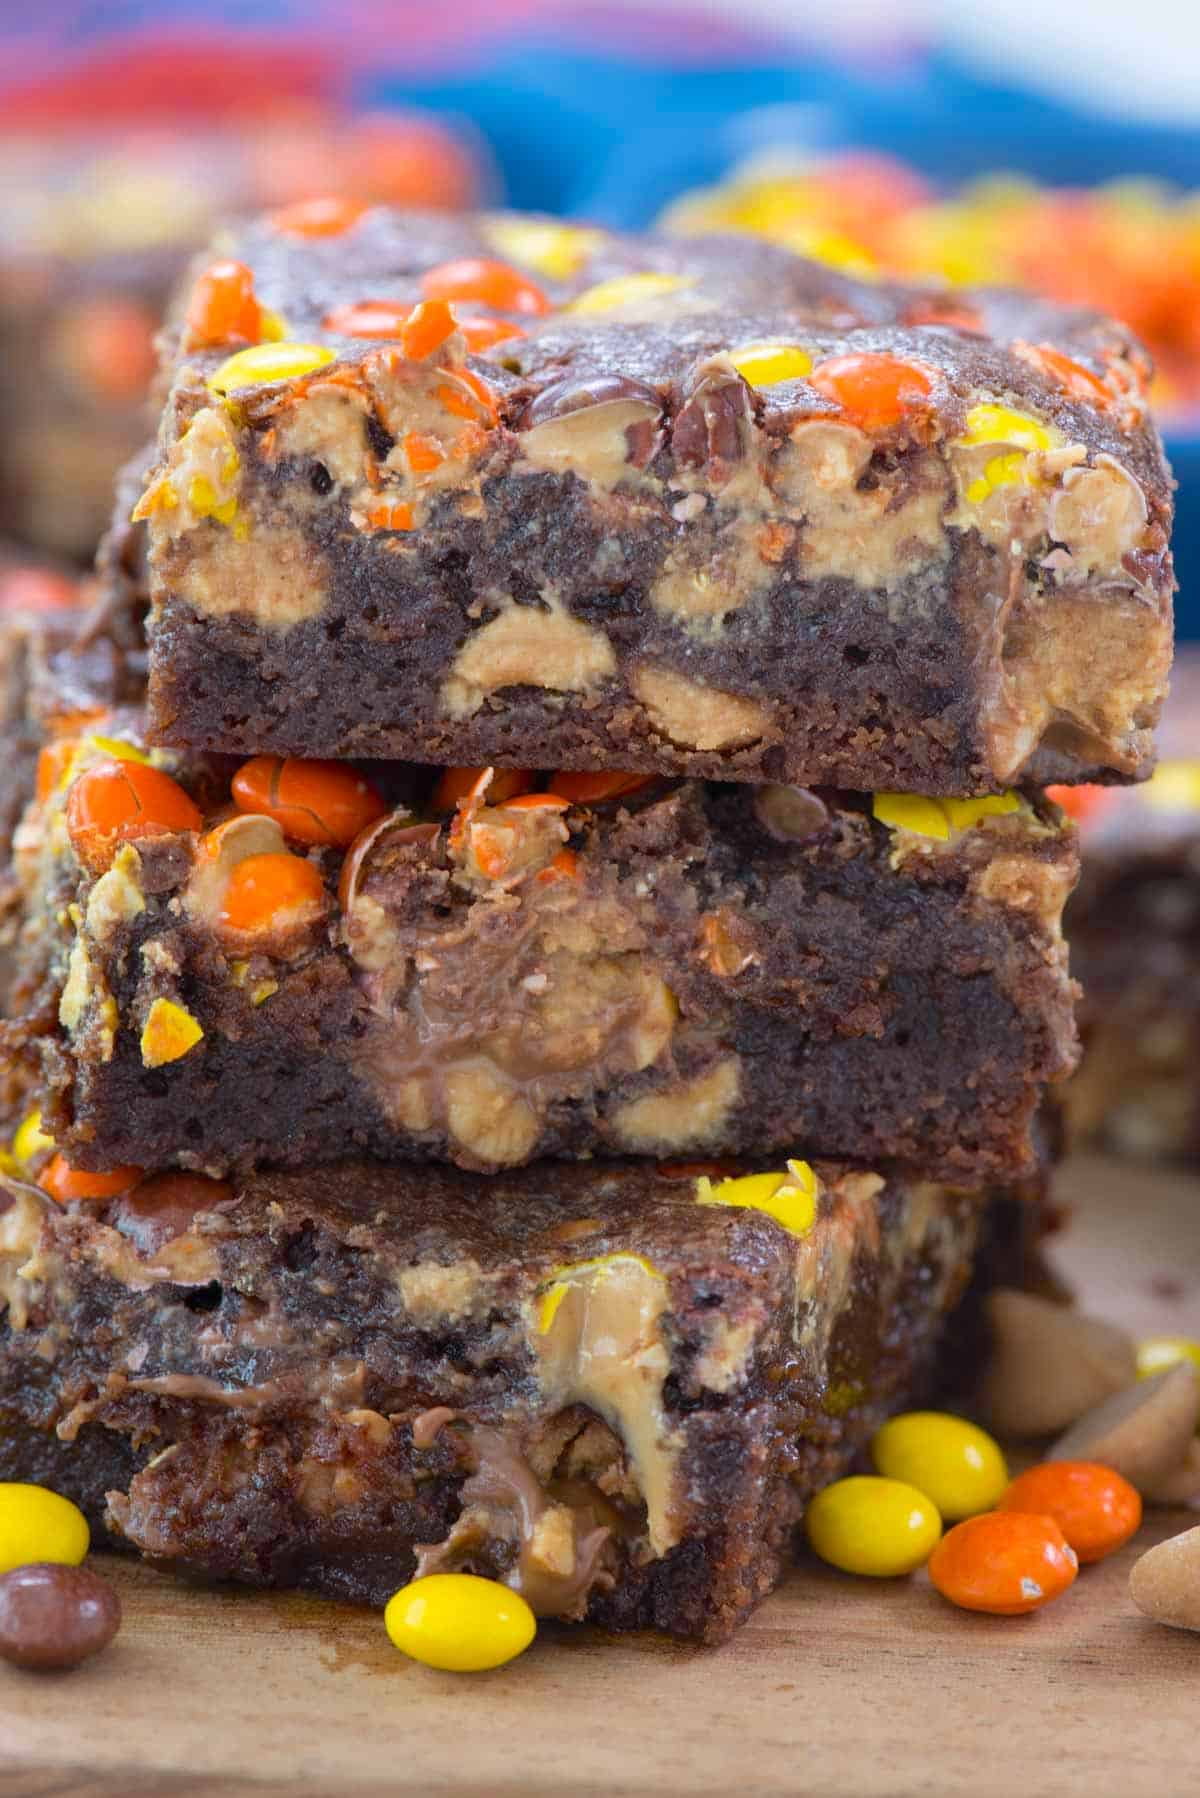 stacked brownies with yellow and orange reeses pieces baked inside.